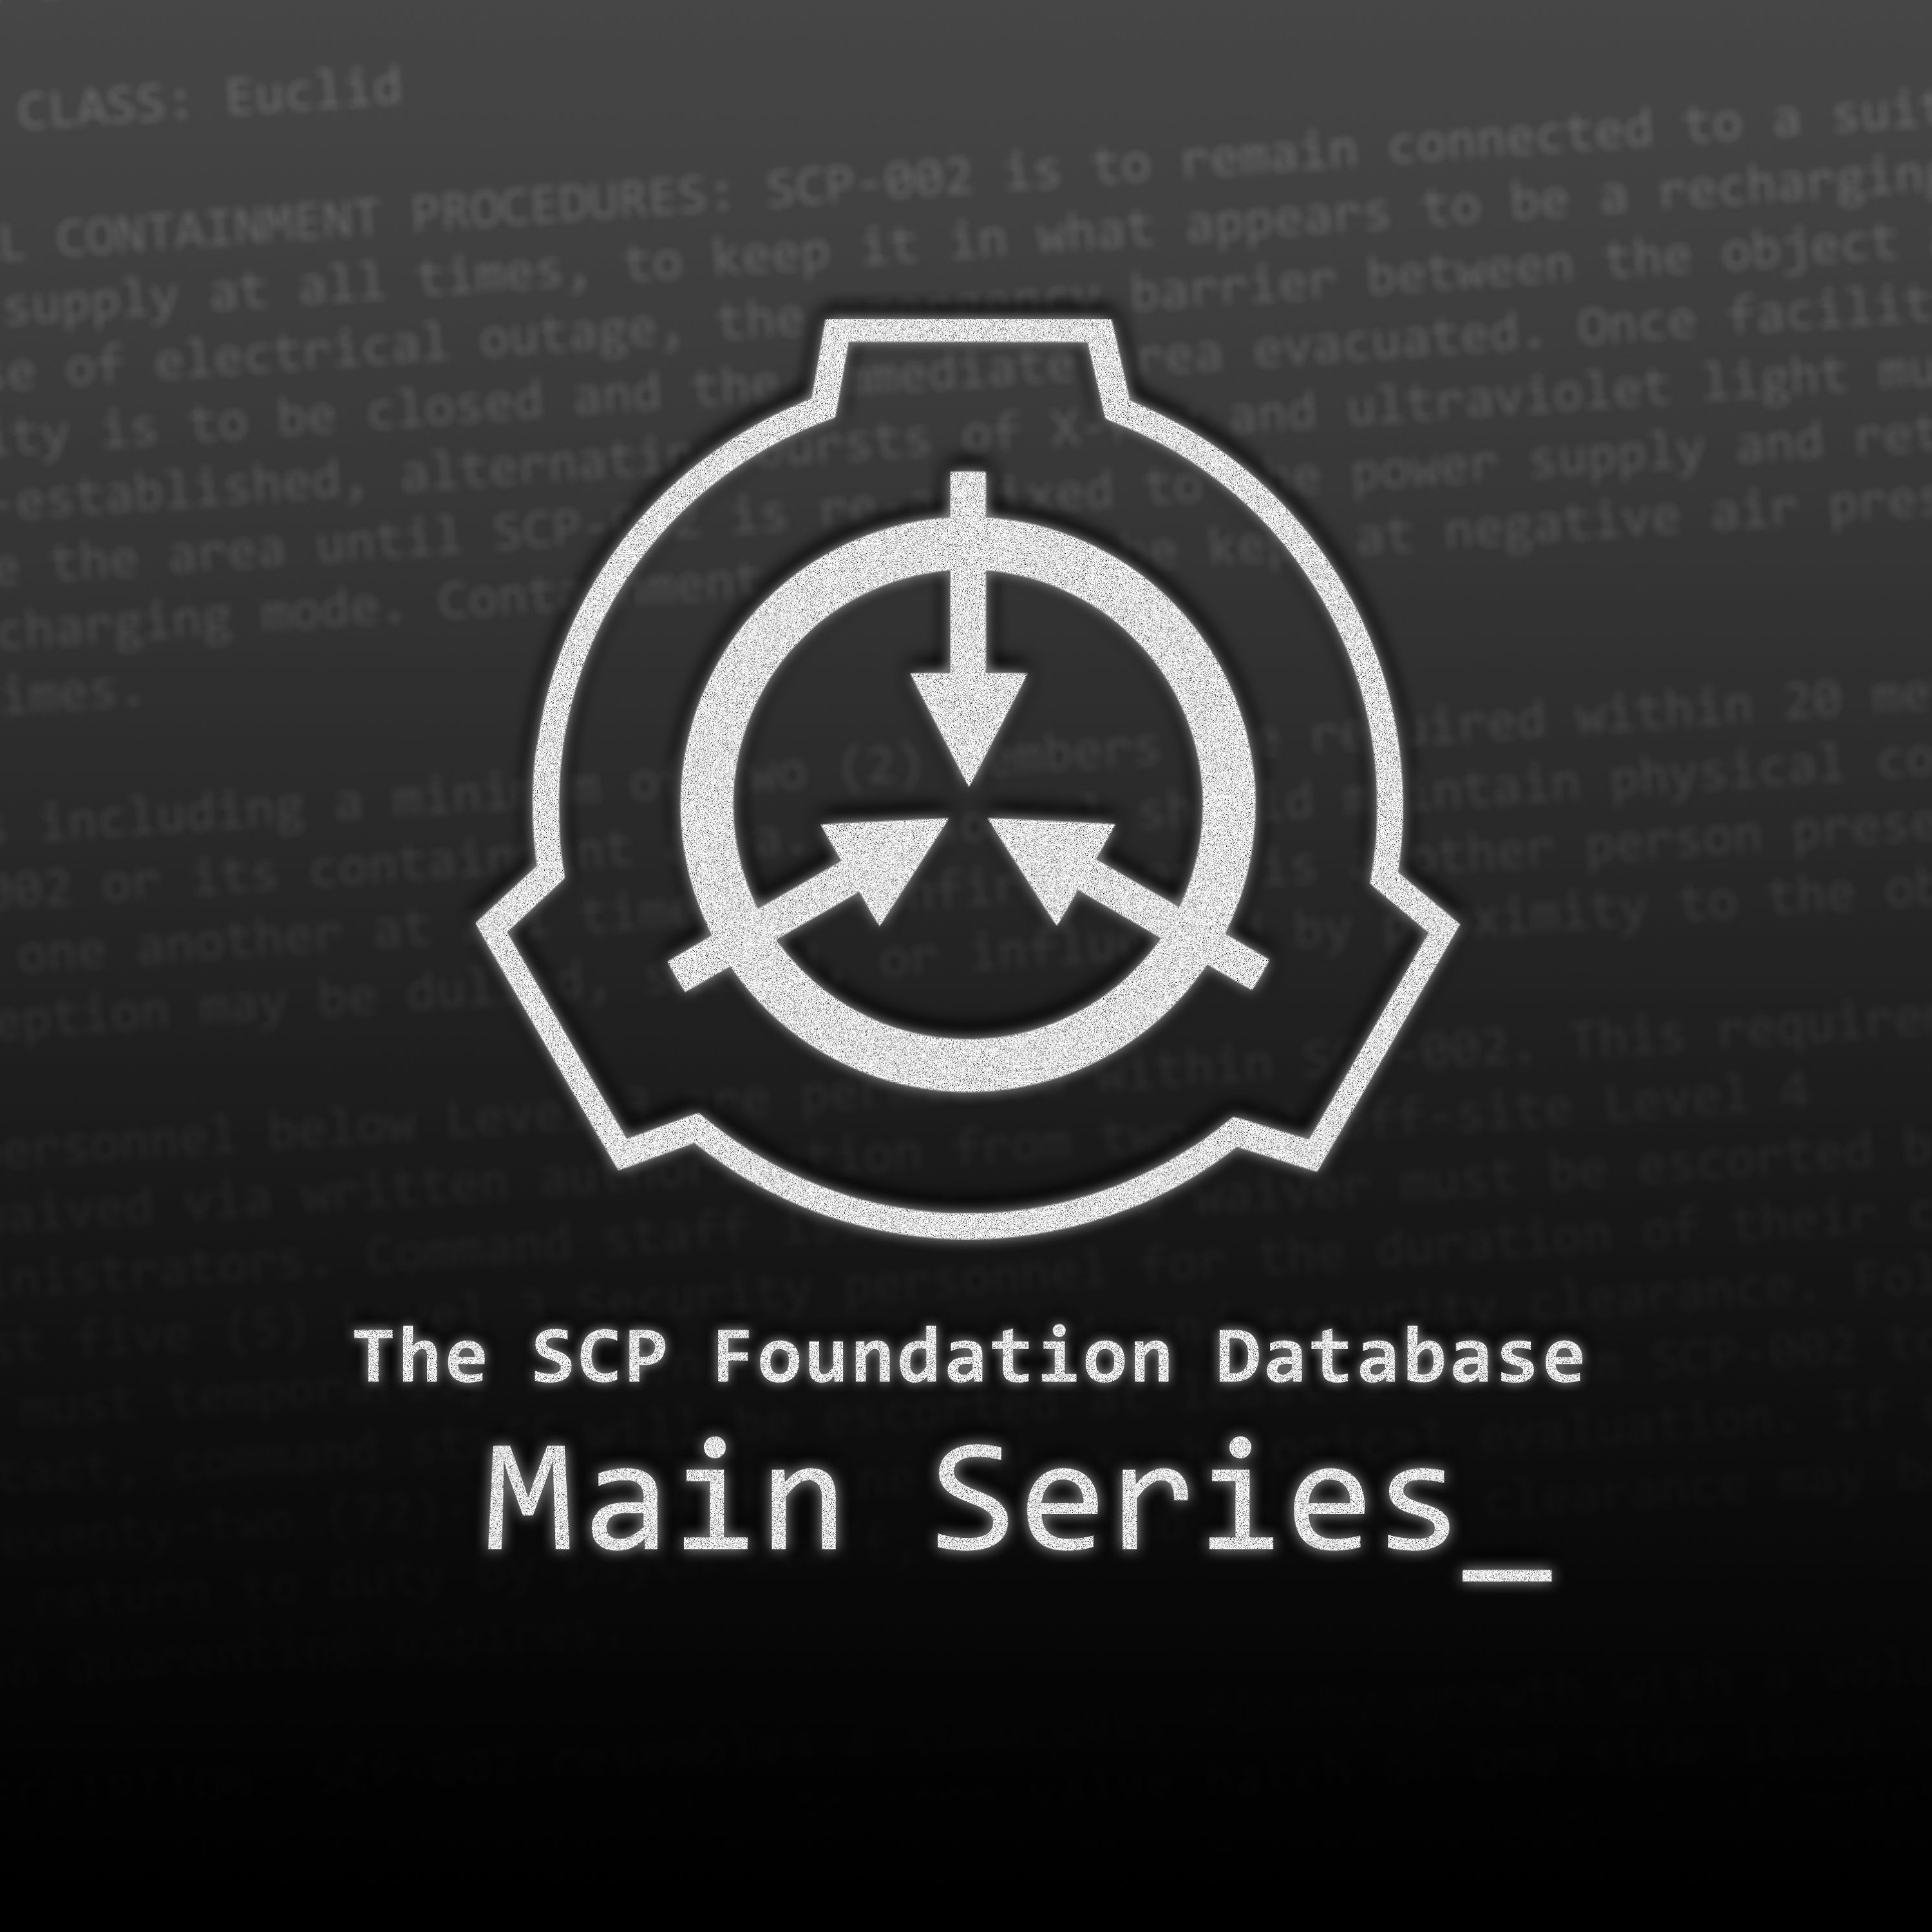 SCP-008-J - Geoff  The SCP Foundation Database